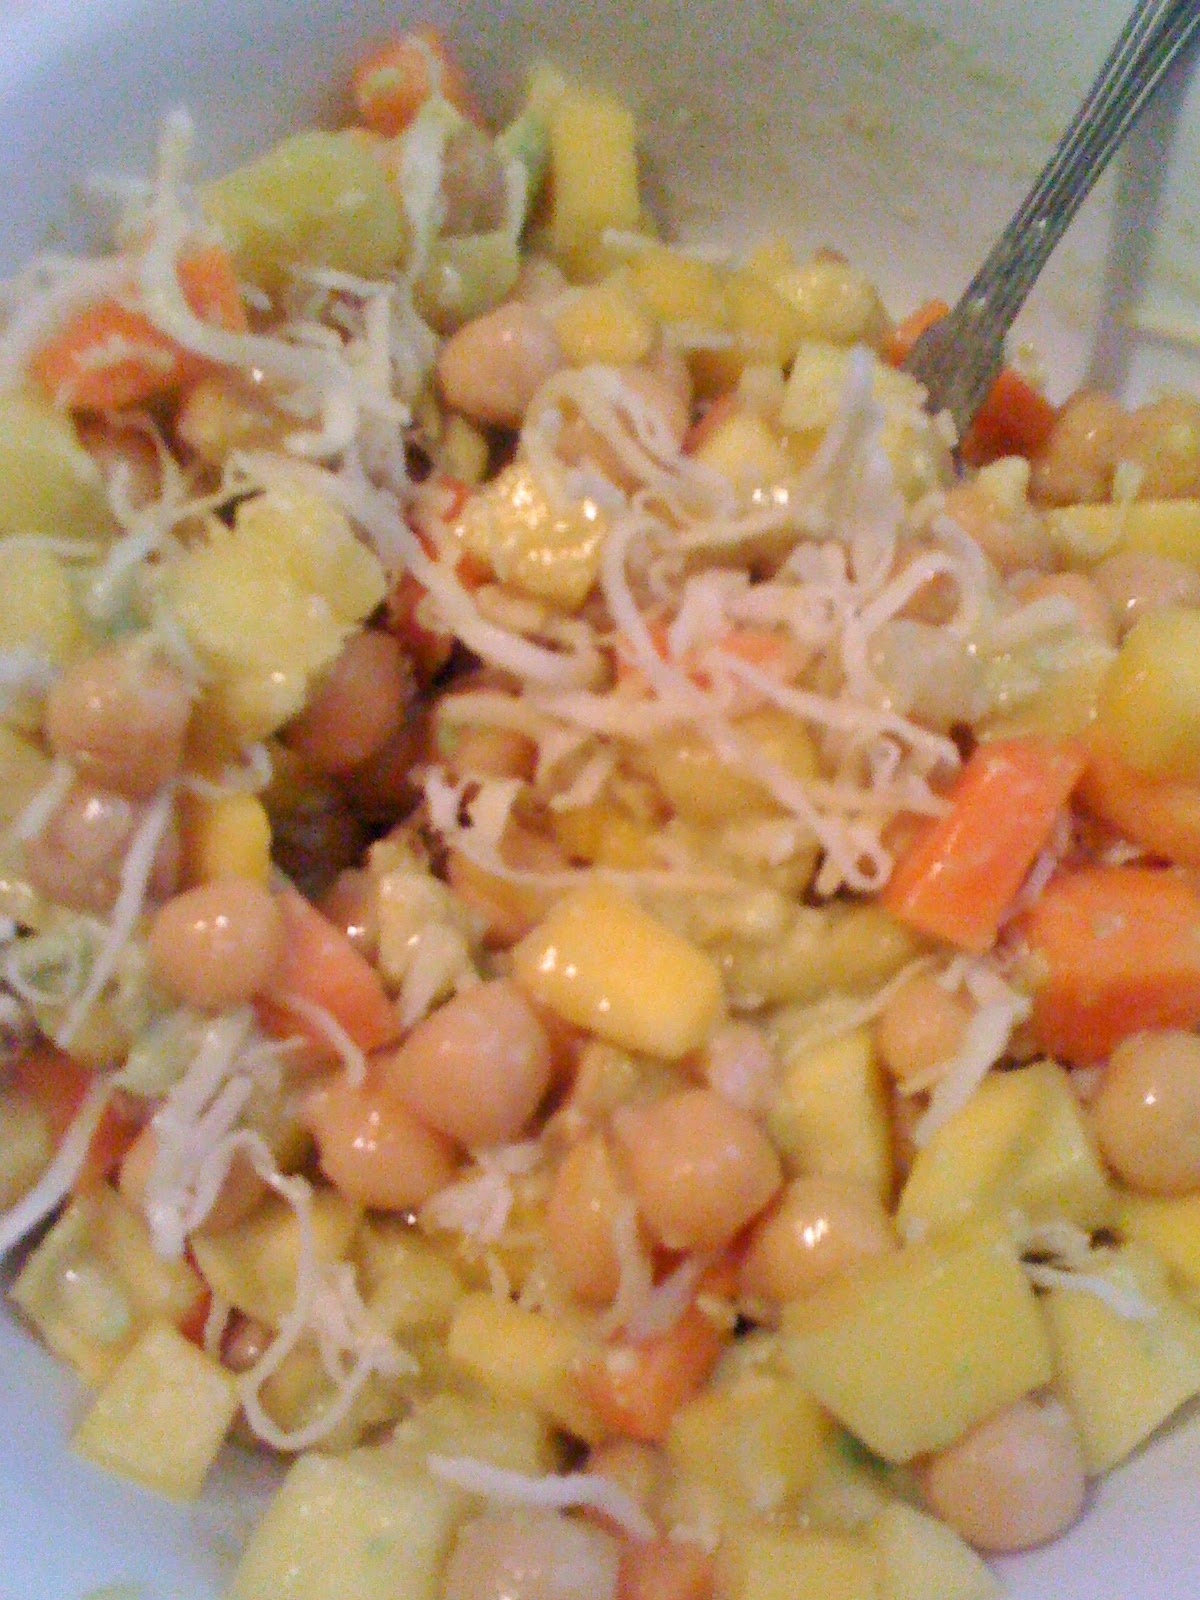 Afroveganchick Vegan Tropical Chickpea Salad With Avocado Coconut